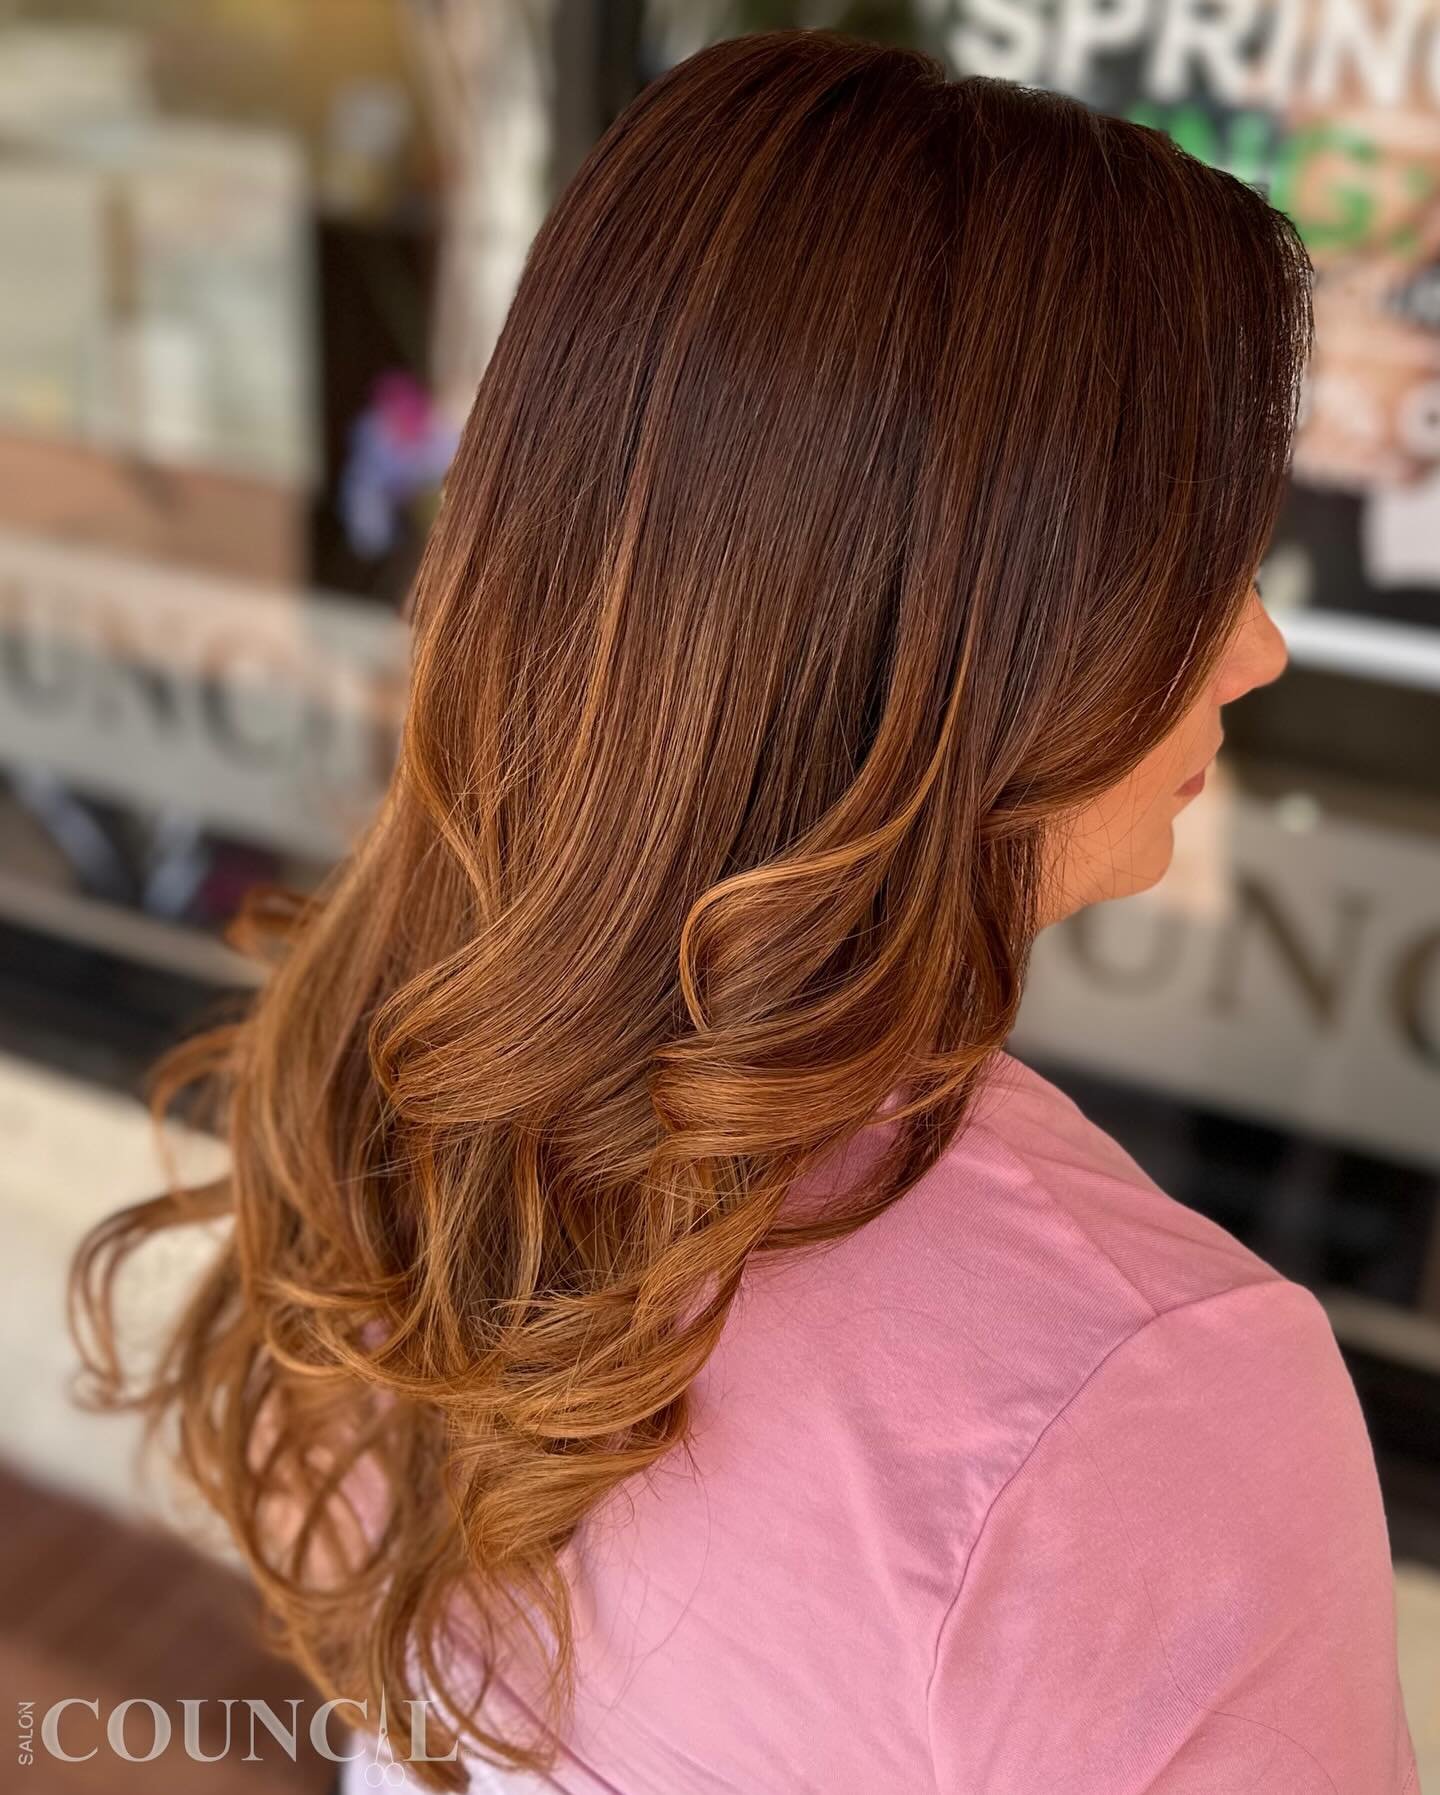 🎉#dimensionalcopper 
Revitalize your look with a precise root touch-up, all-over copper toner refresh, luxurious Fusio-Dose treatment, and a fresh haircut styled with a blowdry! 
🧡Shine bright with vibrant copper tones! #CopperGlow #HairMakeover

C